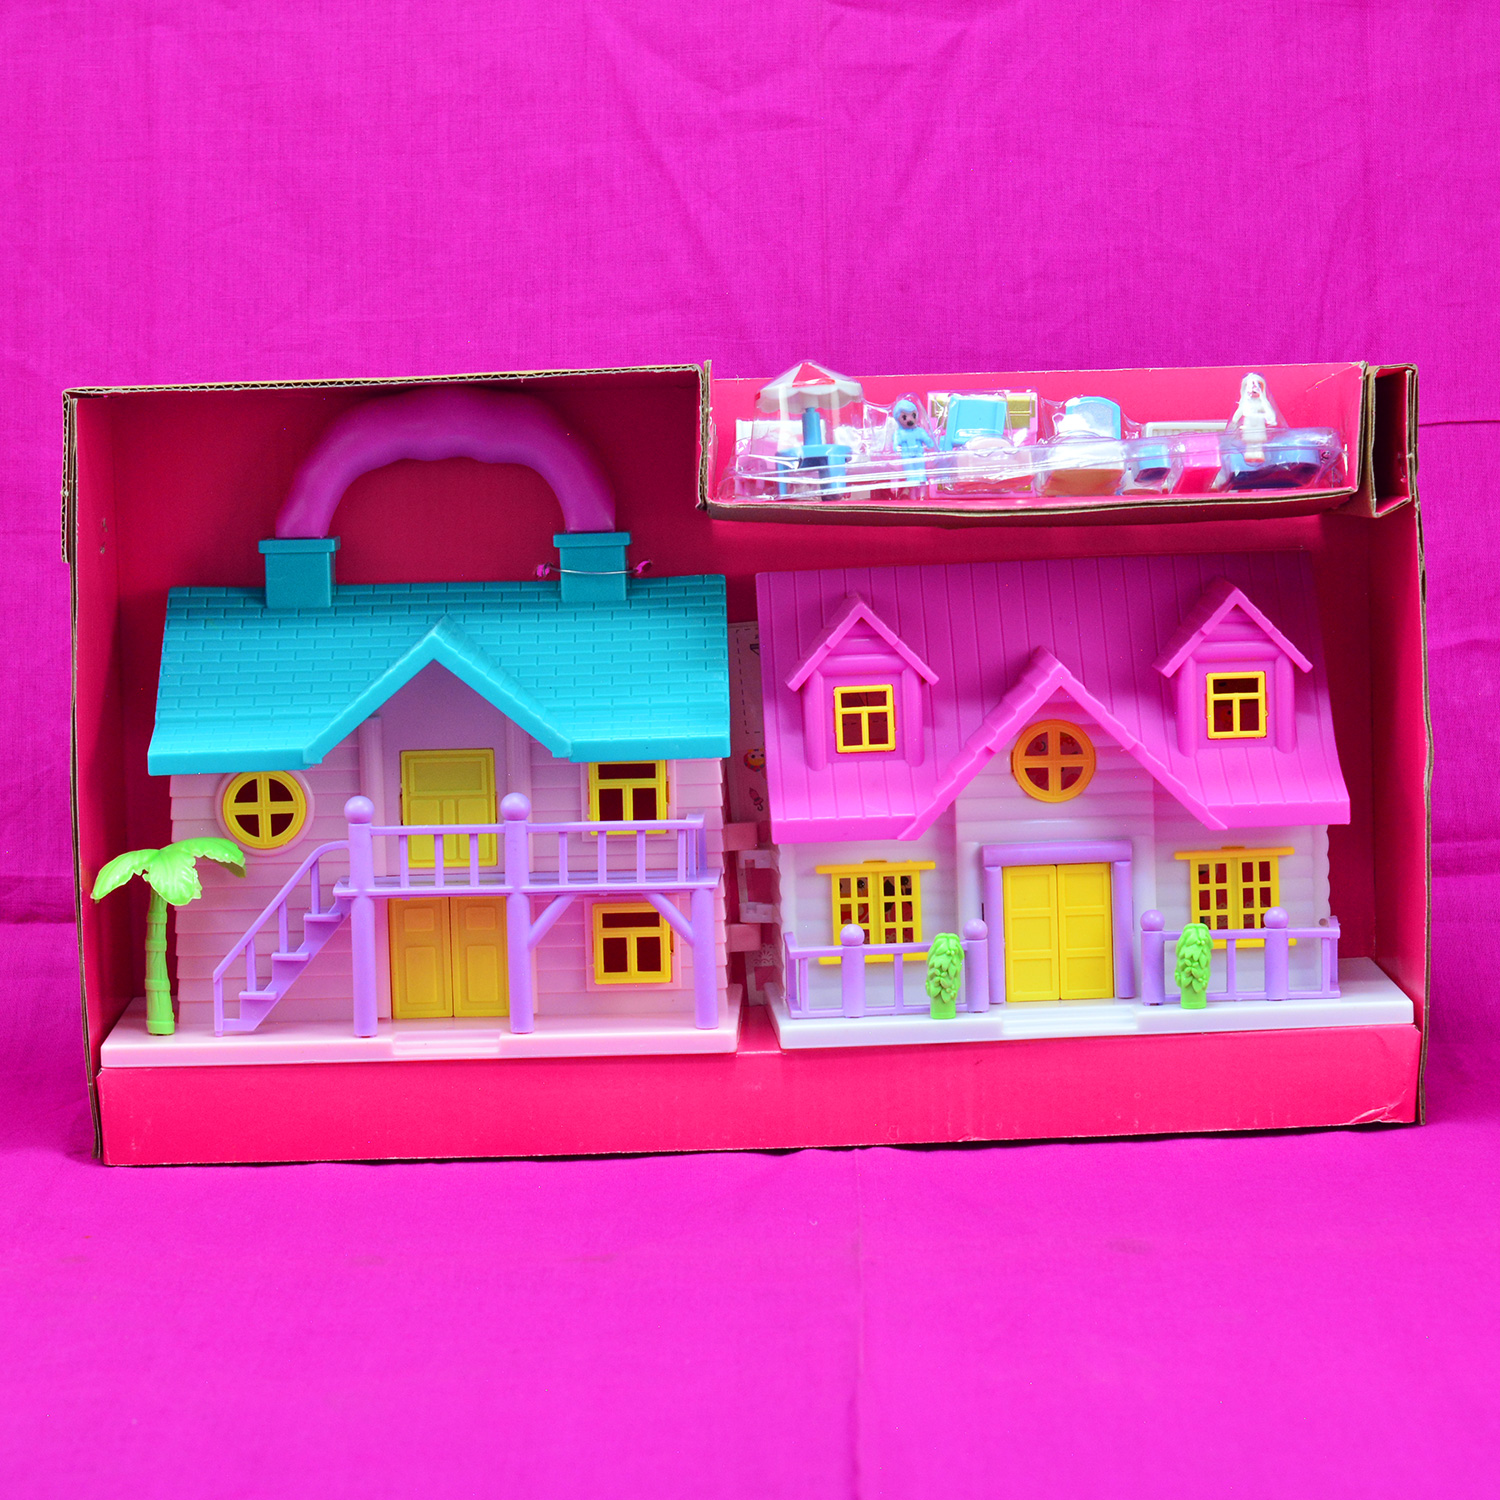 New Playing Toy Small Doll House for Girls Kids